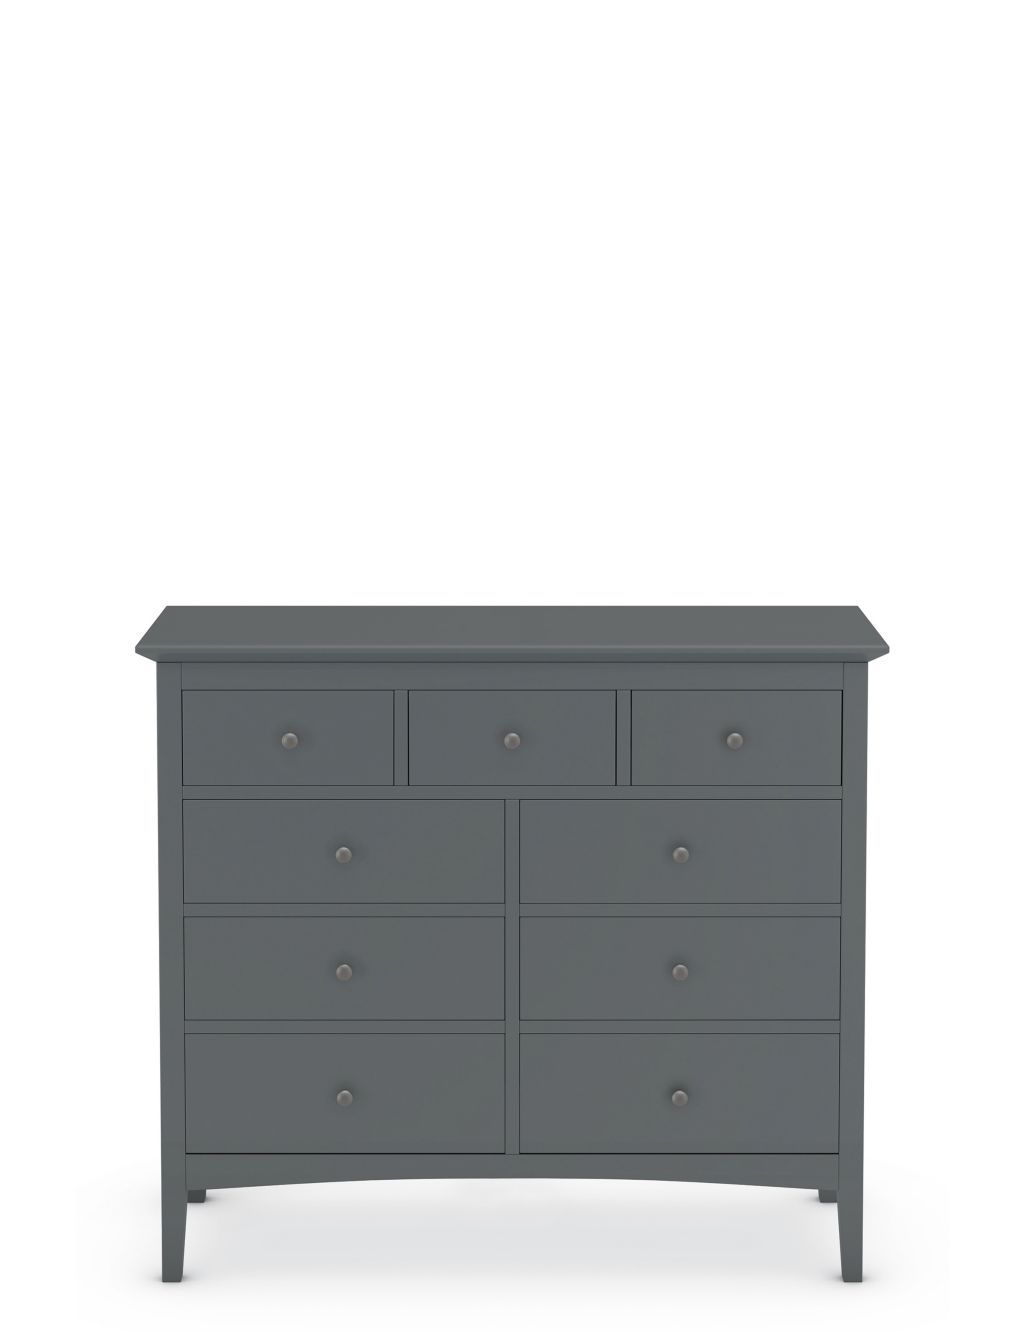 Hastings 9 Drawer Chest